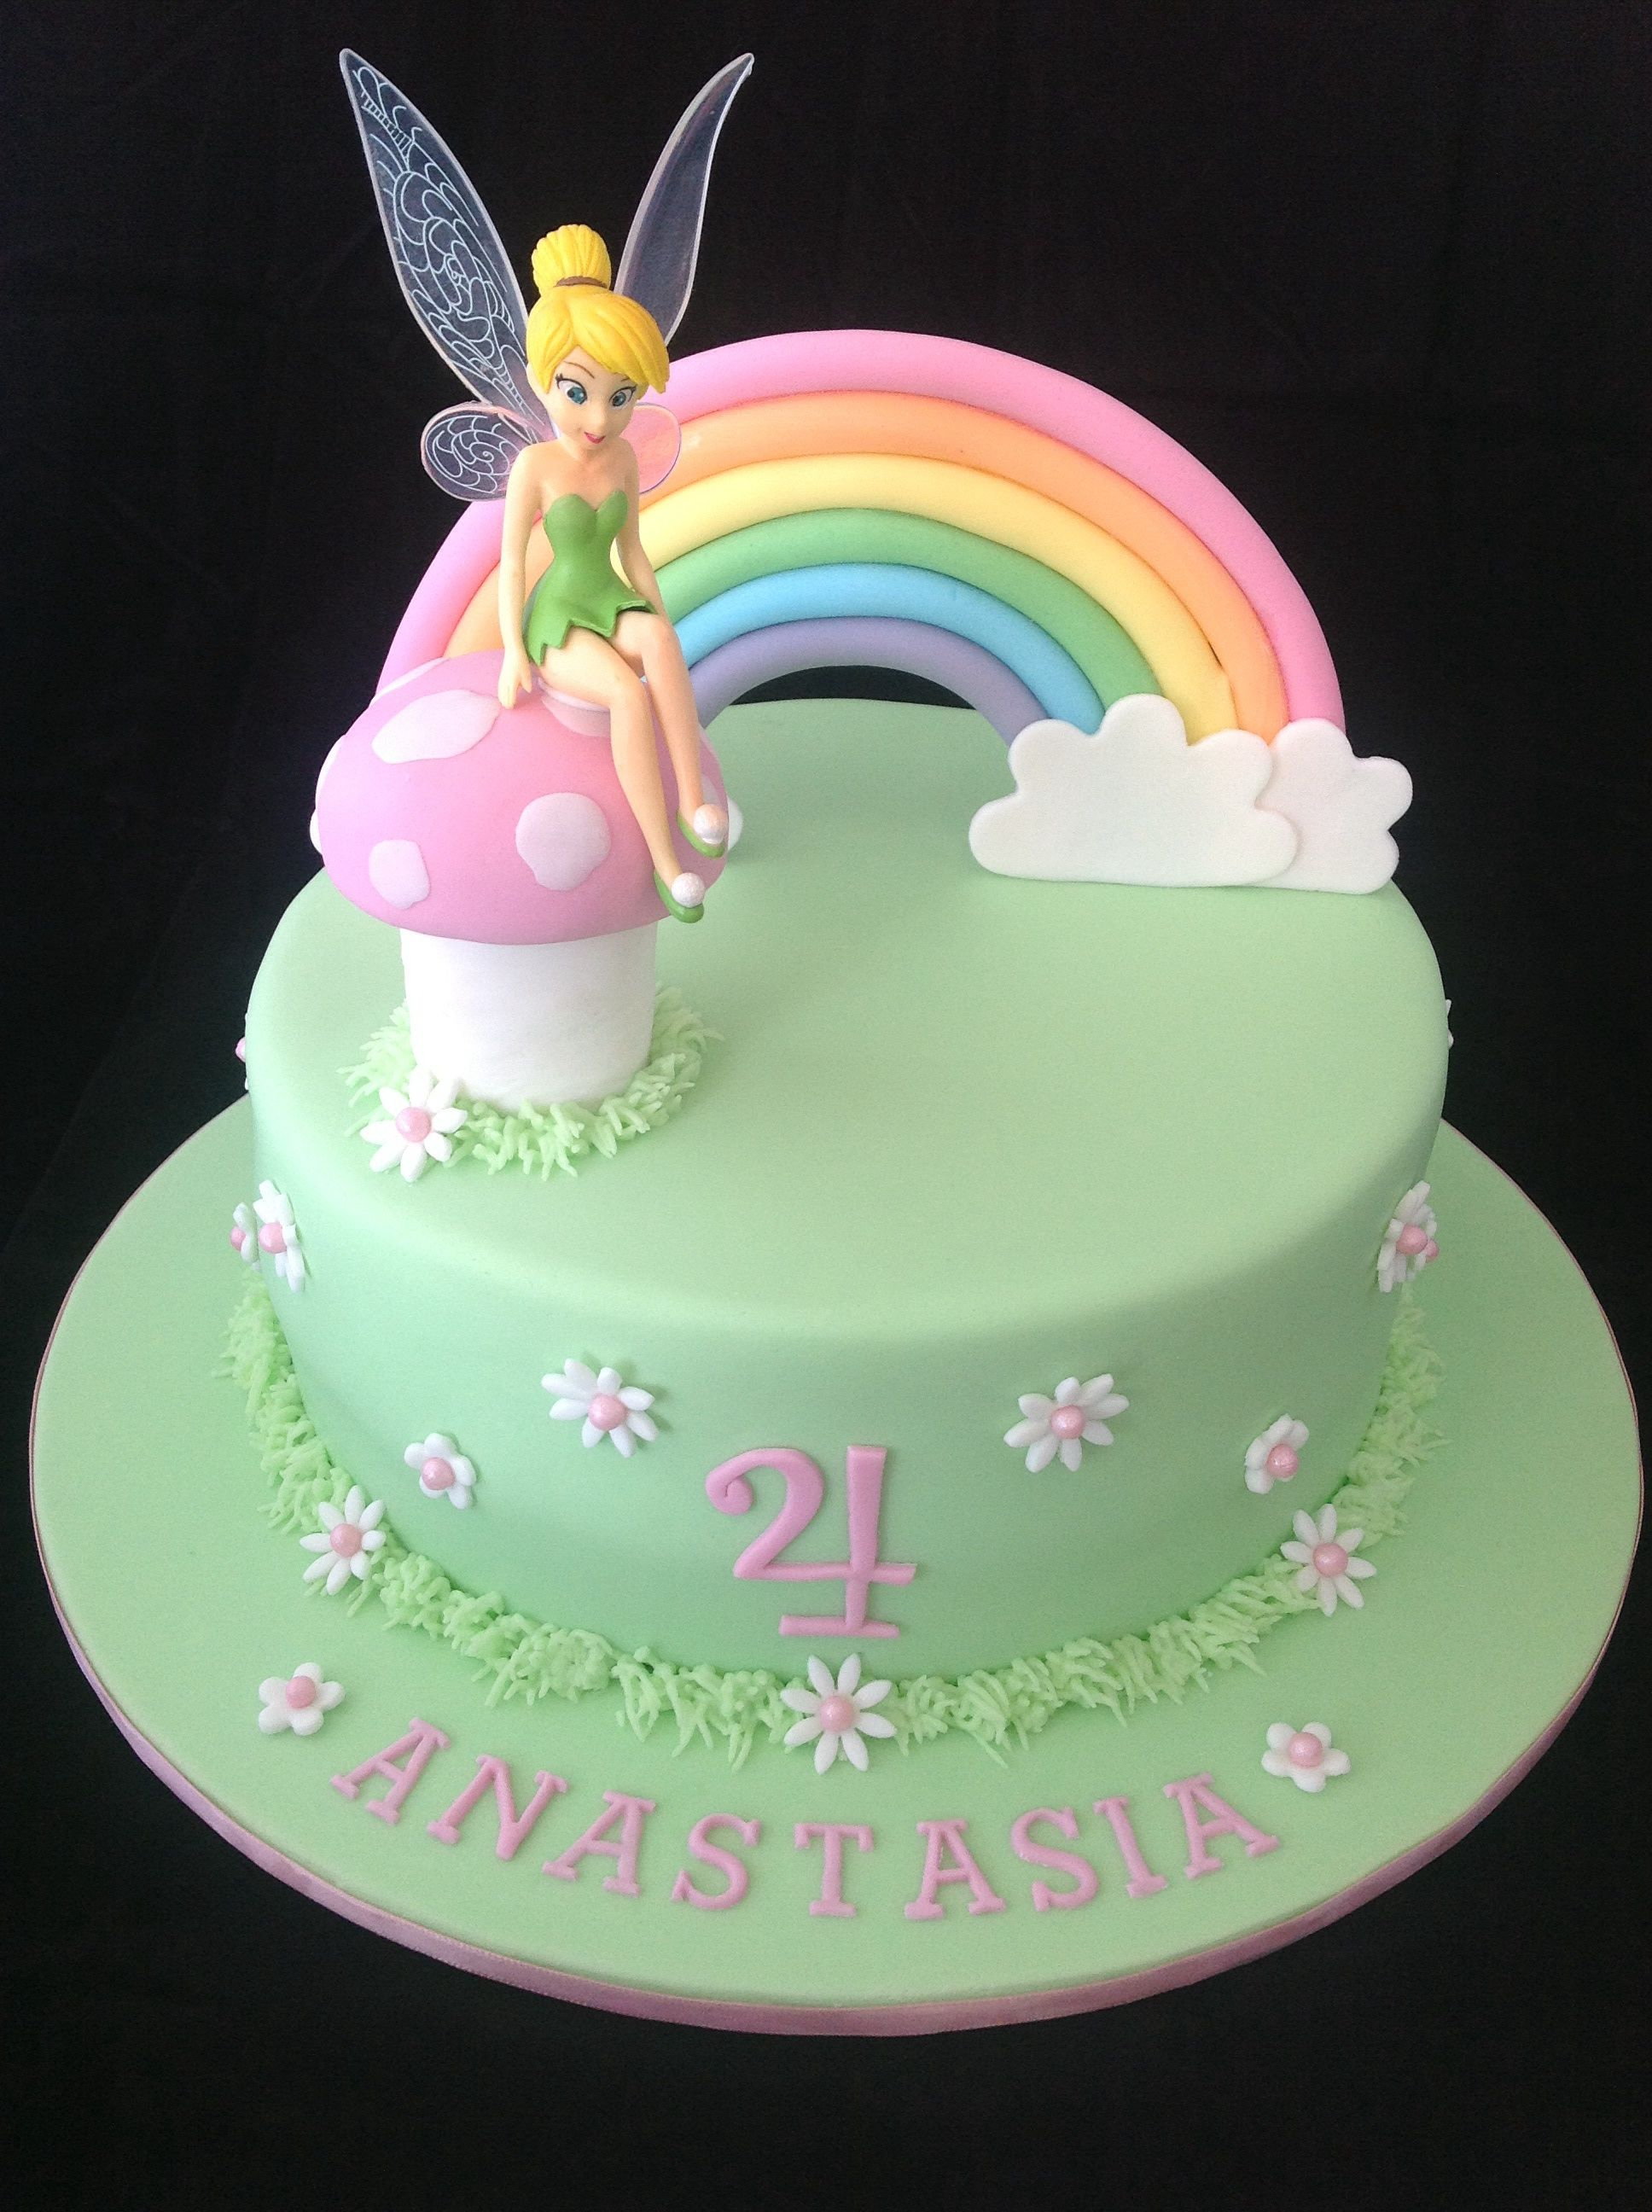 Tinkerbell Birthday Cakes Tinkerbell Cake Love The Simplicity Of This One Tinkerbell